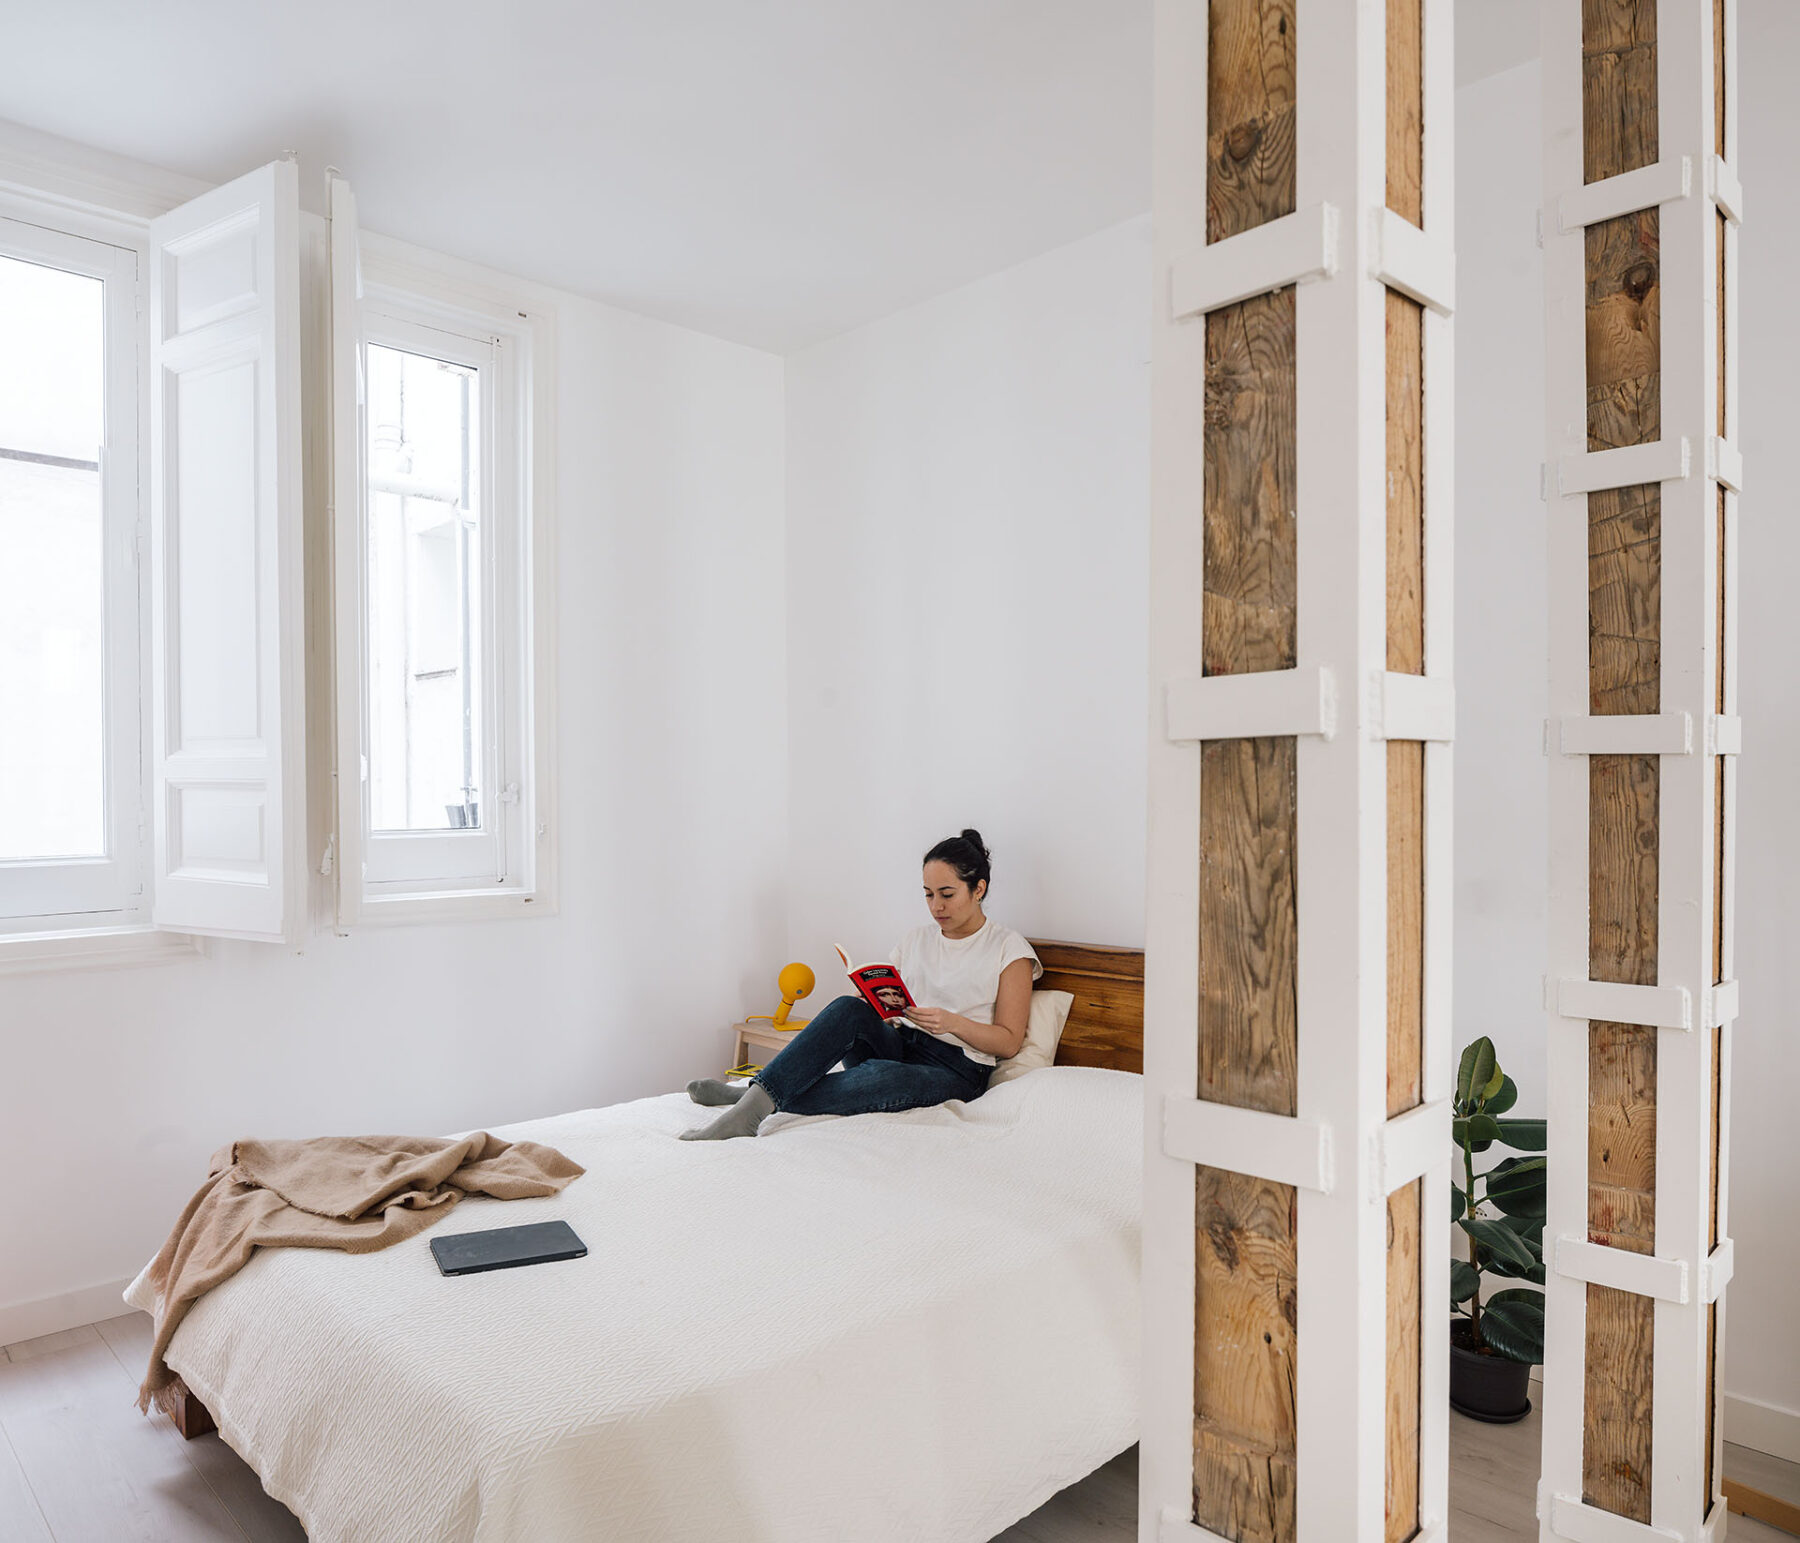 Archisearch Flat White - Renovation of an apartment to rent in Plaza de España by gon architects